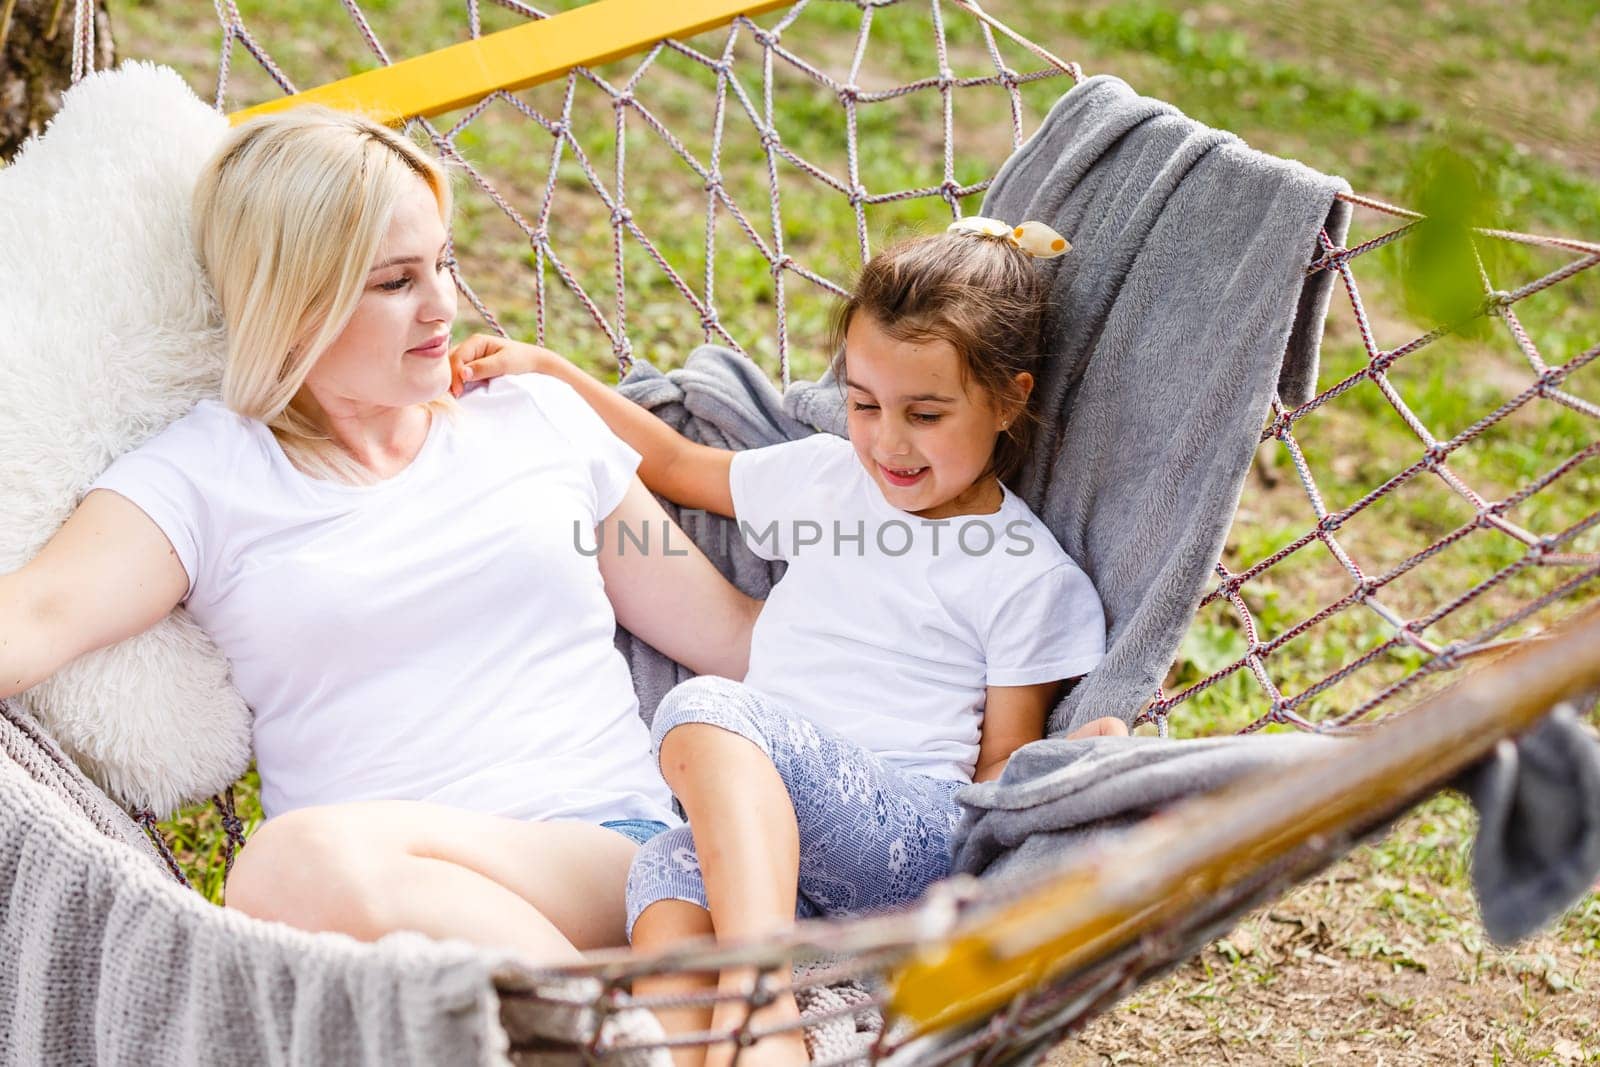 Wide view of a young mother and daughter relaxing together and smiling sitting in a hammock, hugging and lounging during a sunny summer day in a holiday home garden with grass and trees, lifestyle.